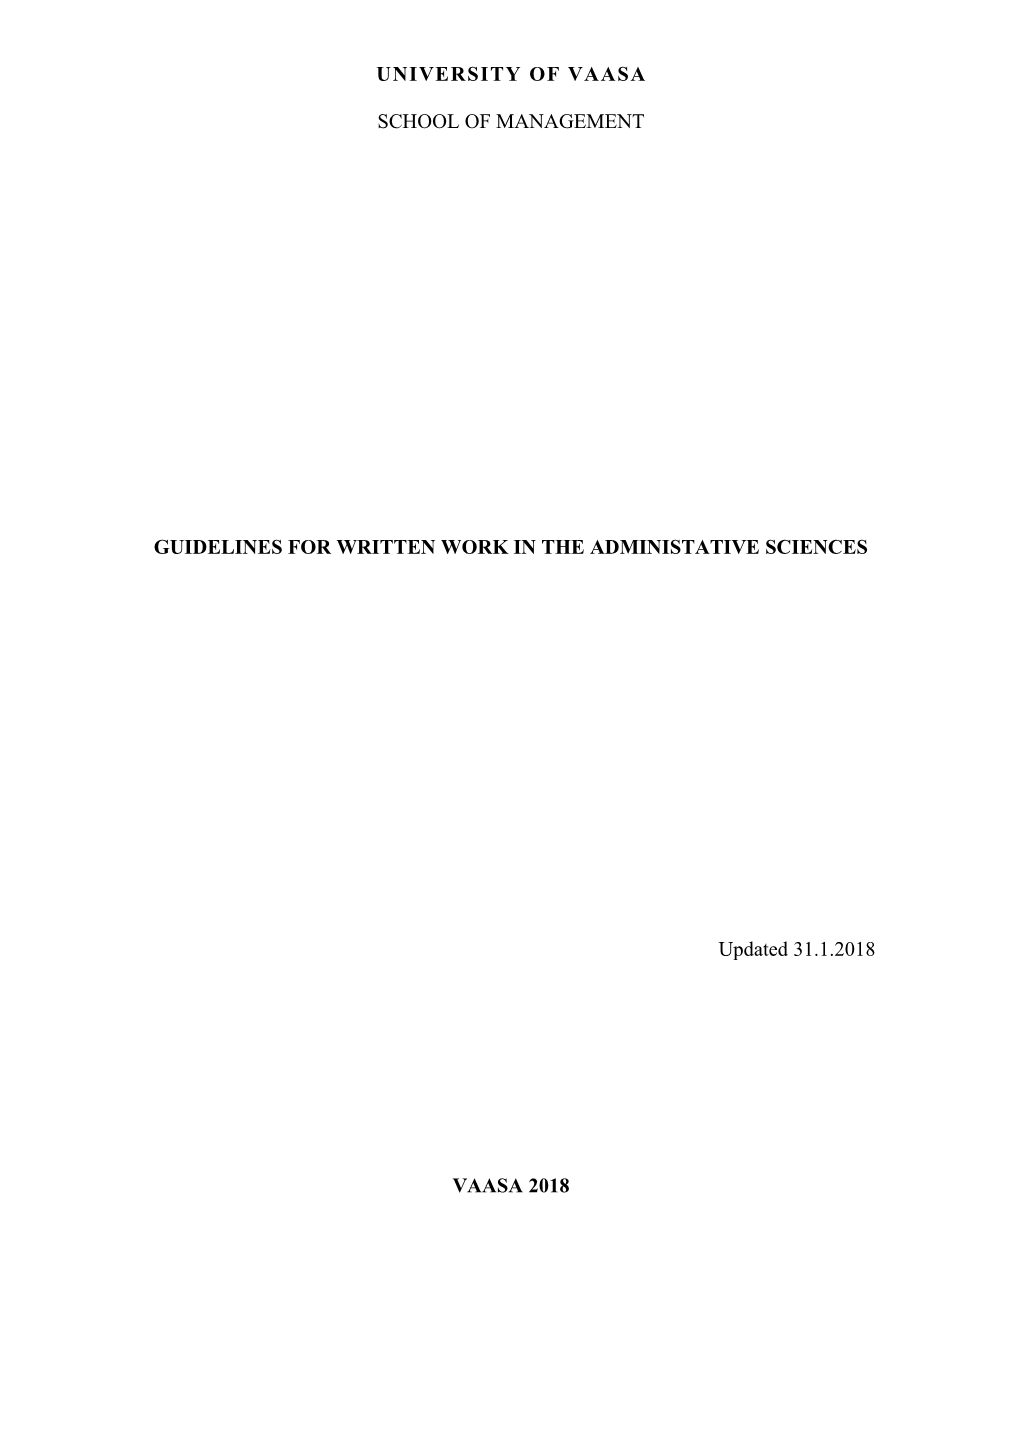 Guidelines for Written Work in the Administative Sciences